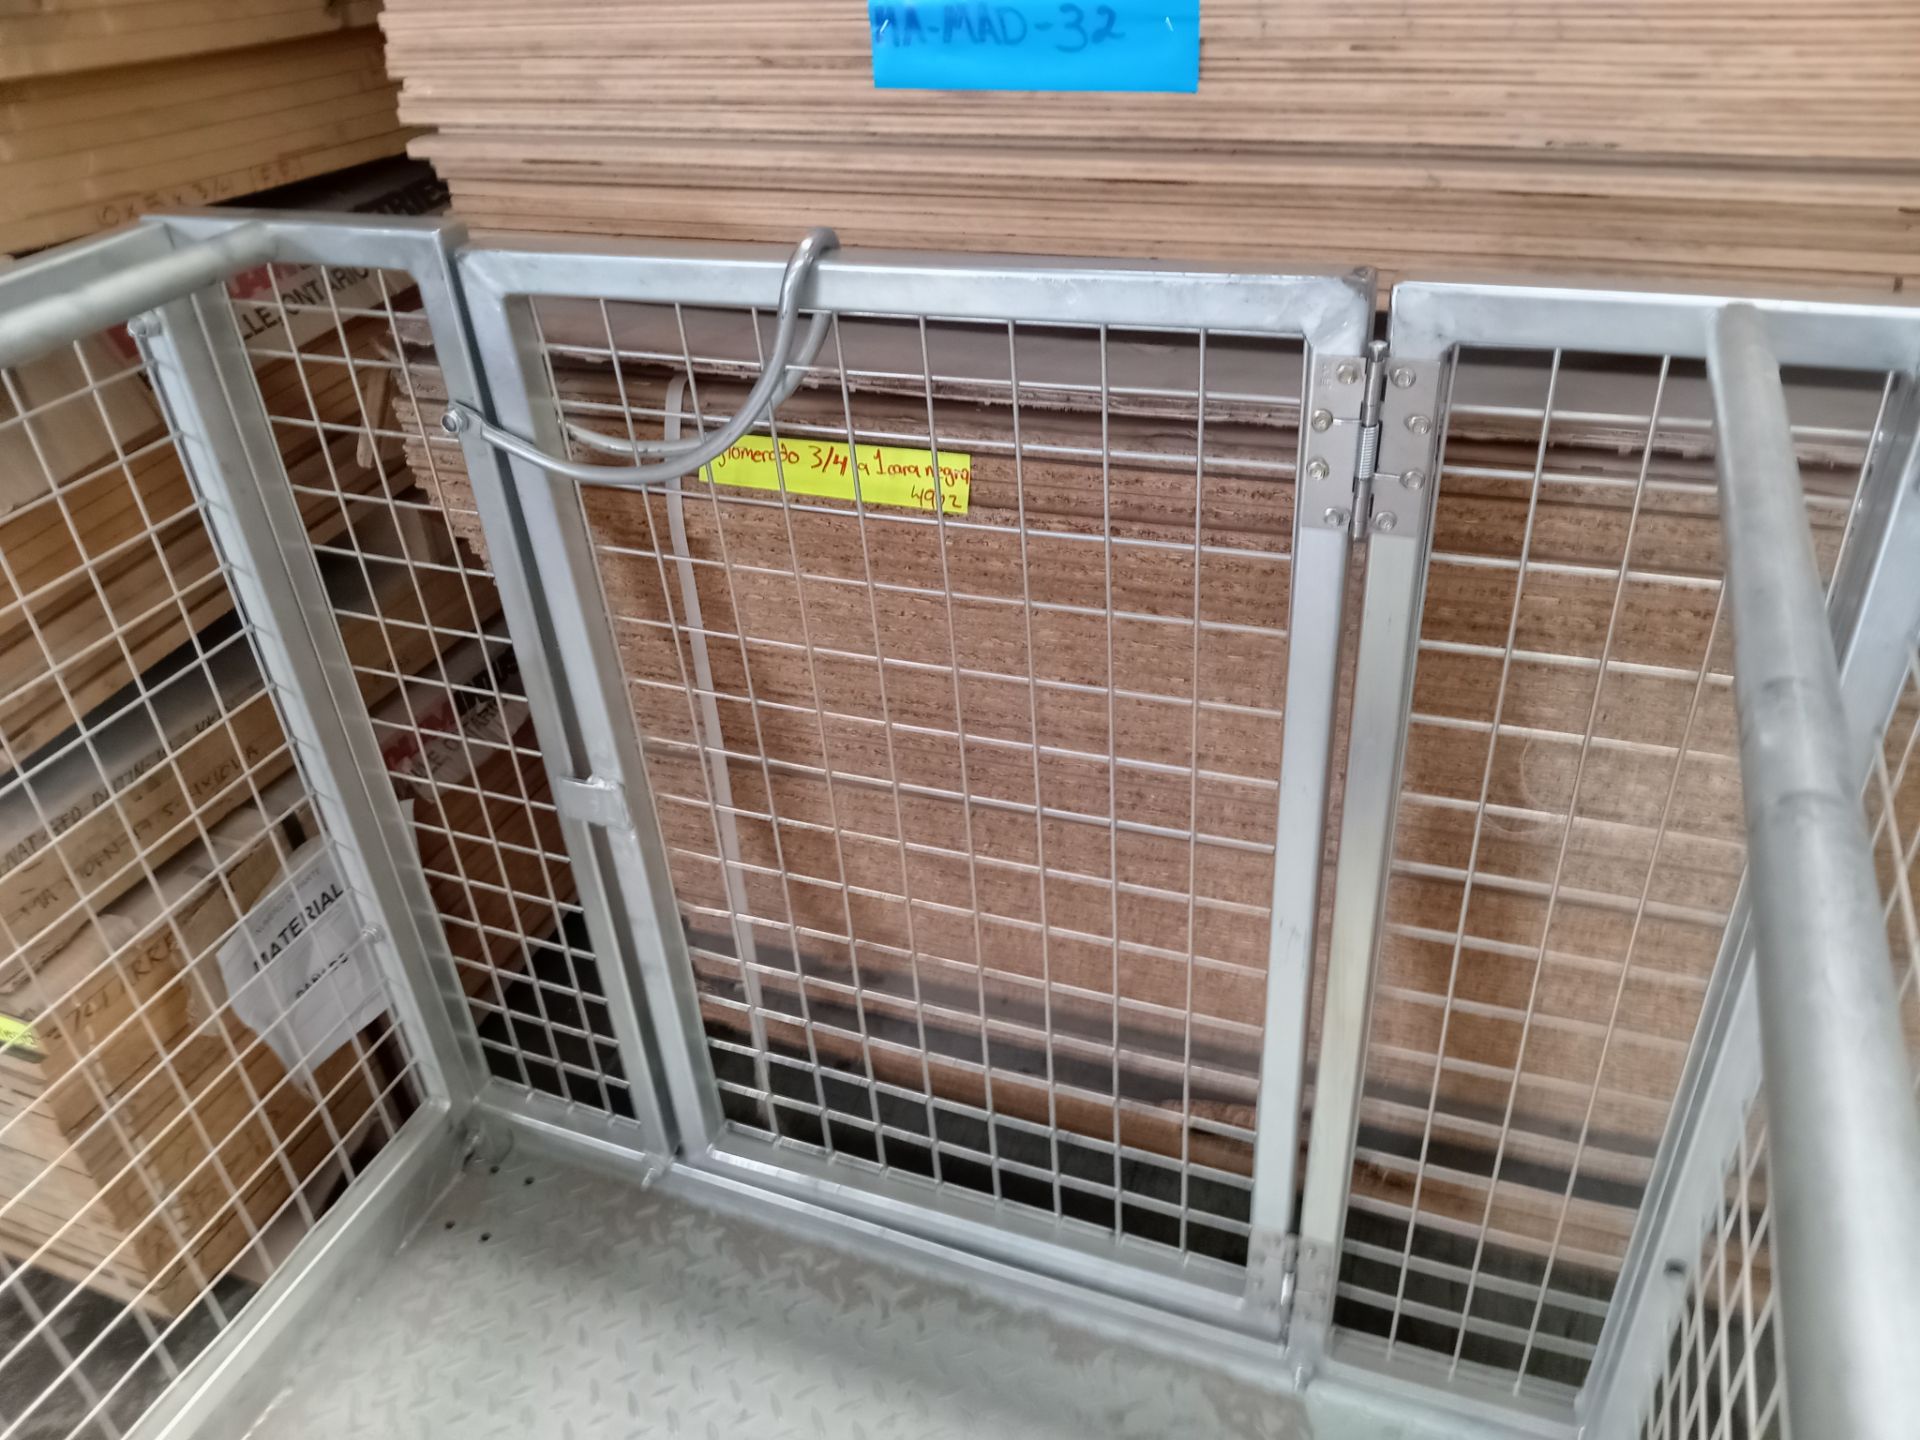 LOT OF (2) PIECES OF FORKLIFT BASKETS - Image 11 of 12